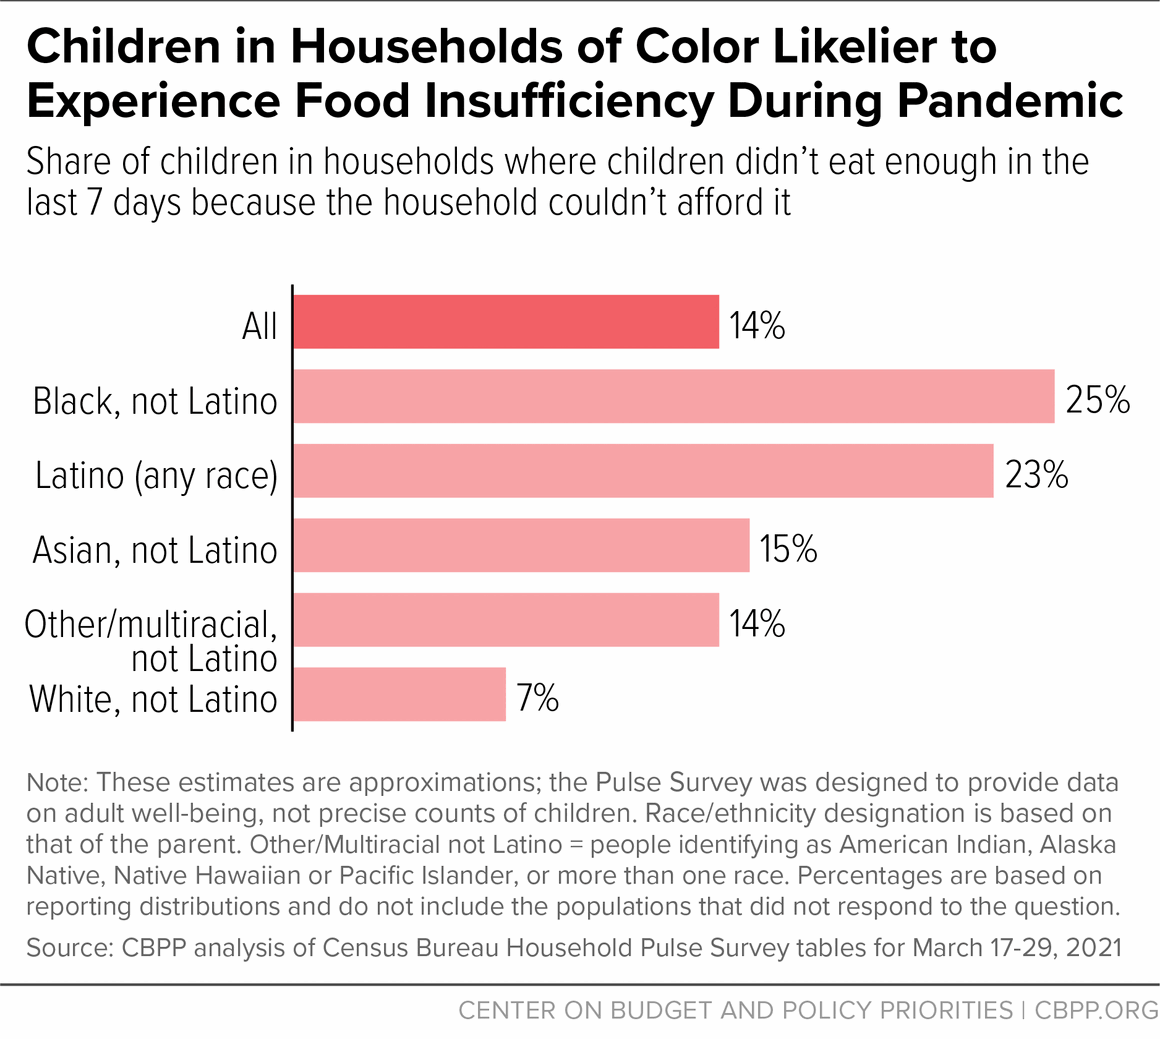 Children in Households of Color Likelier to Experience Food Insufficiency During Pandemic